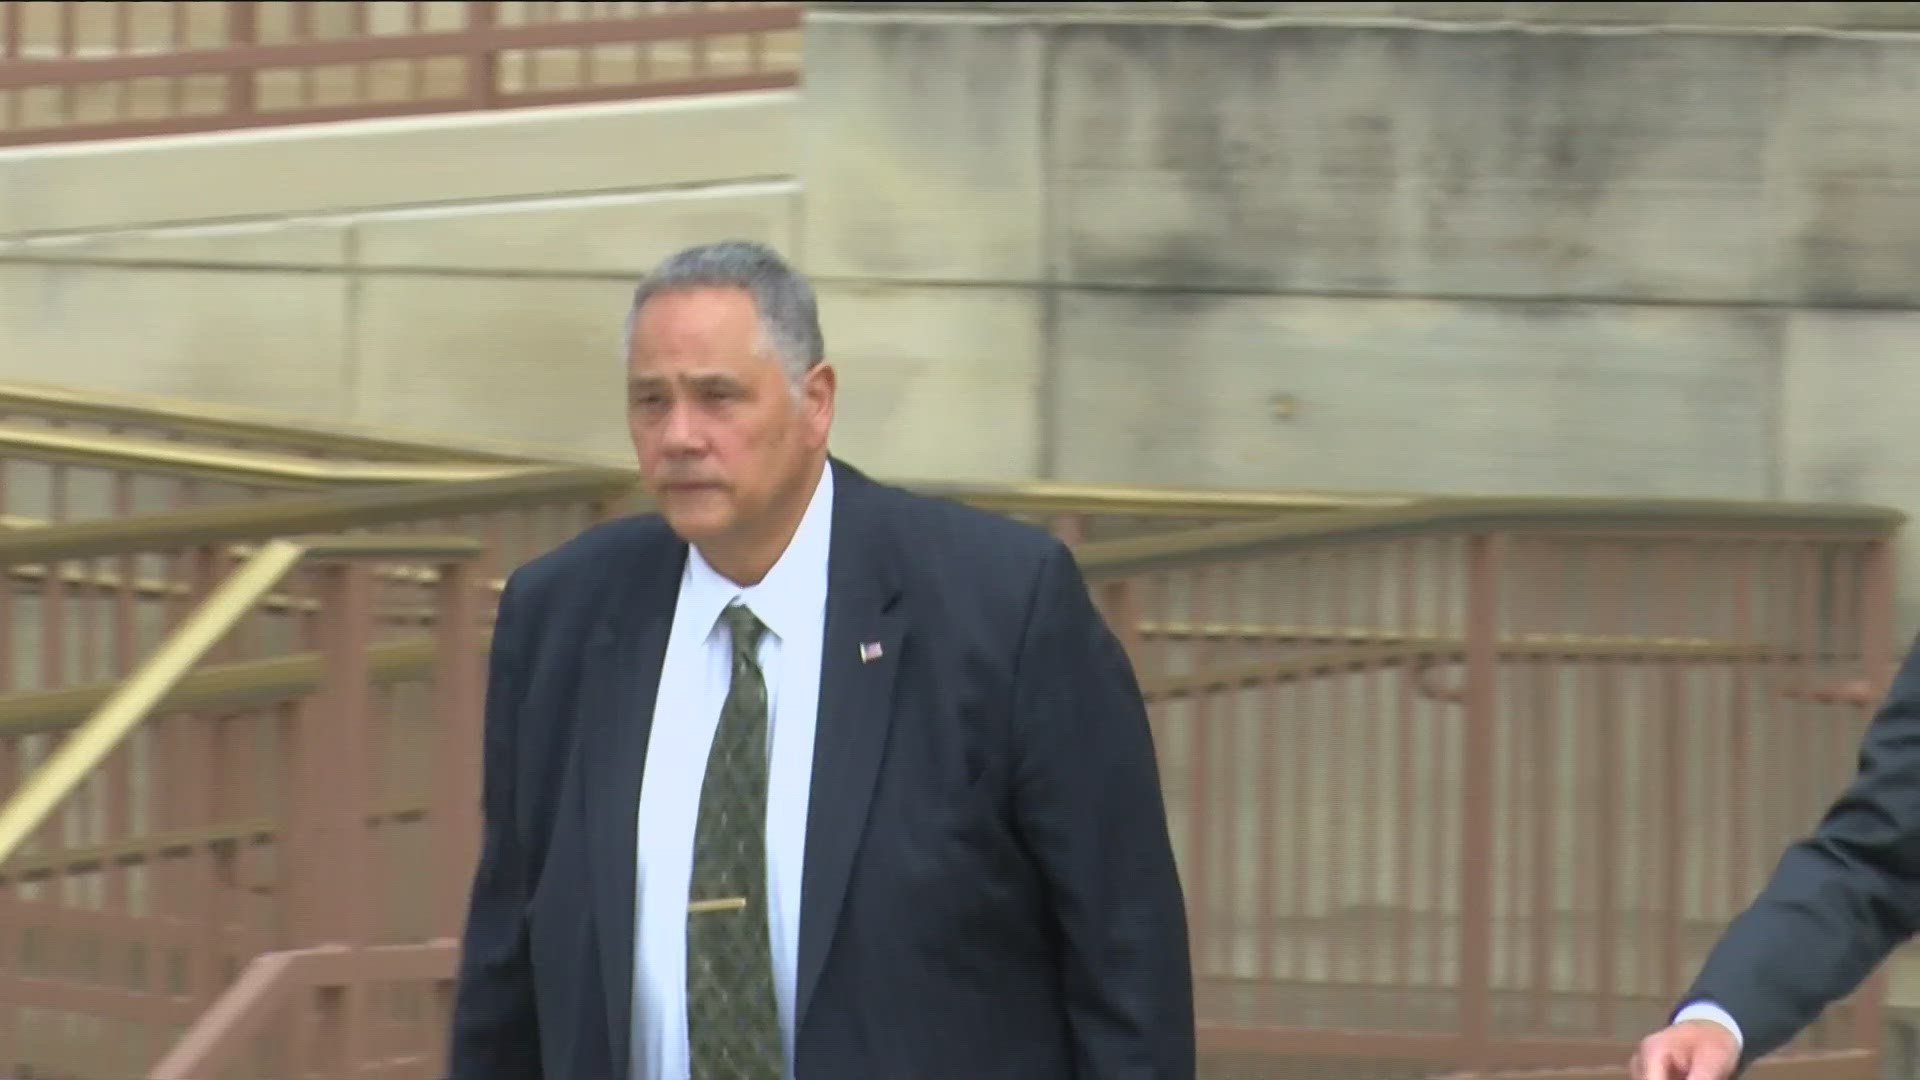 The former Toledo city councilman was found guilty on one charge last month, acquitted on another.